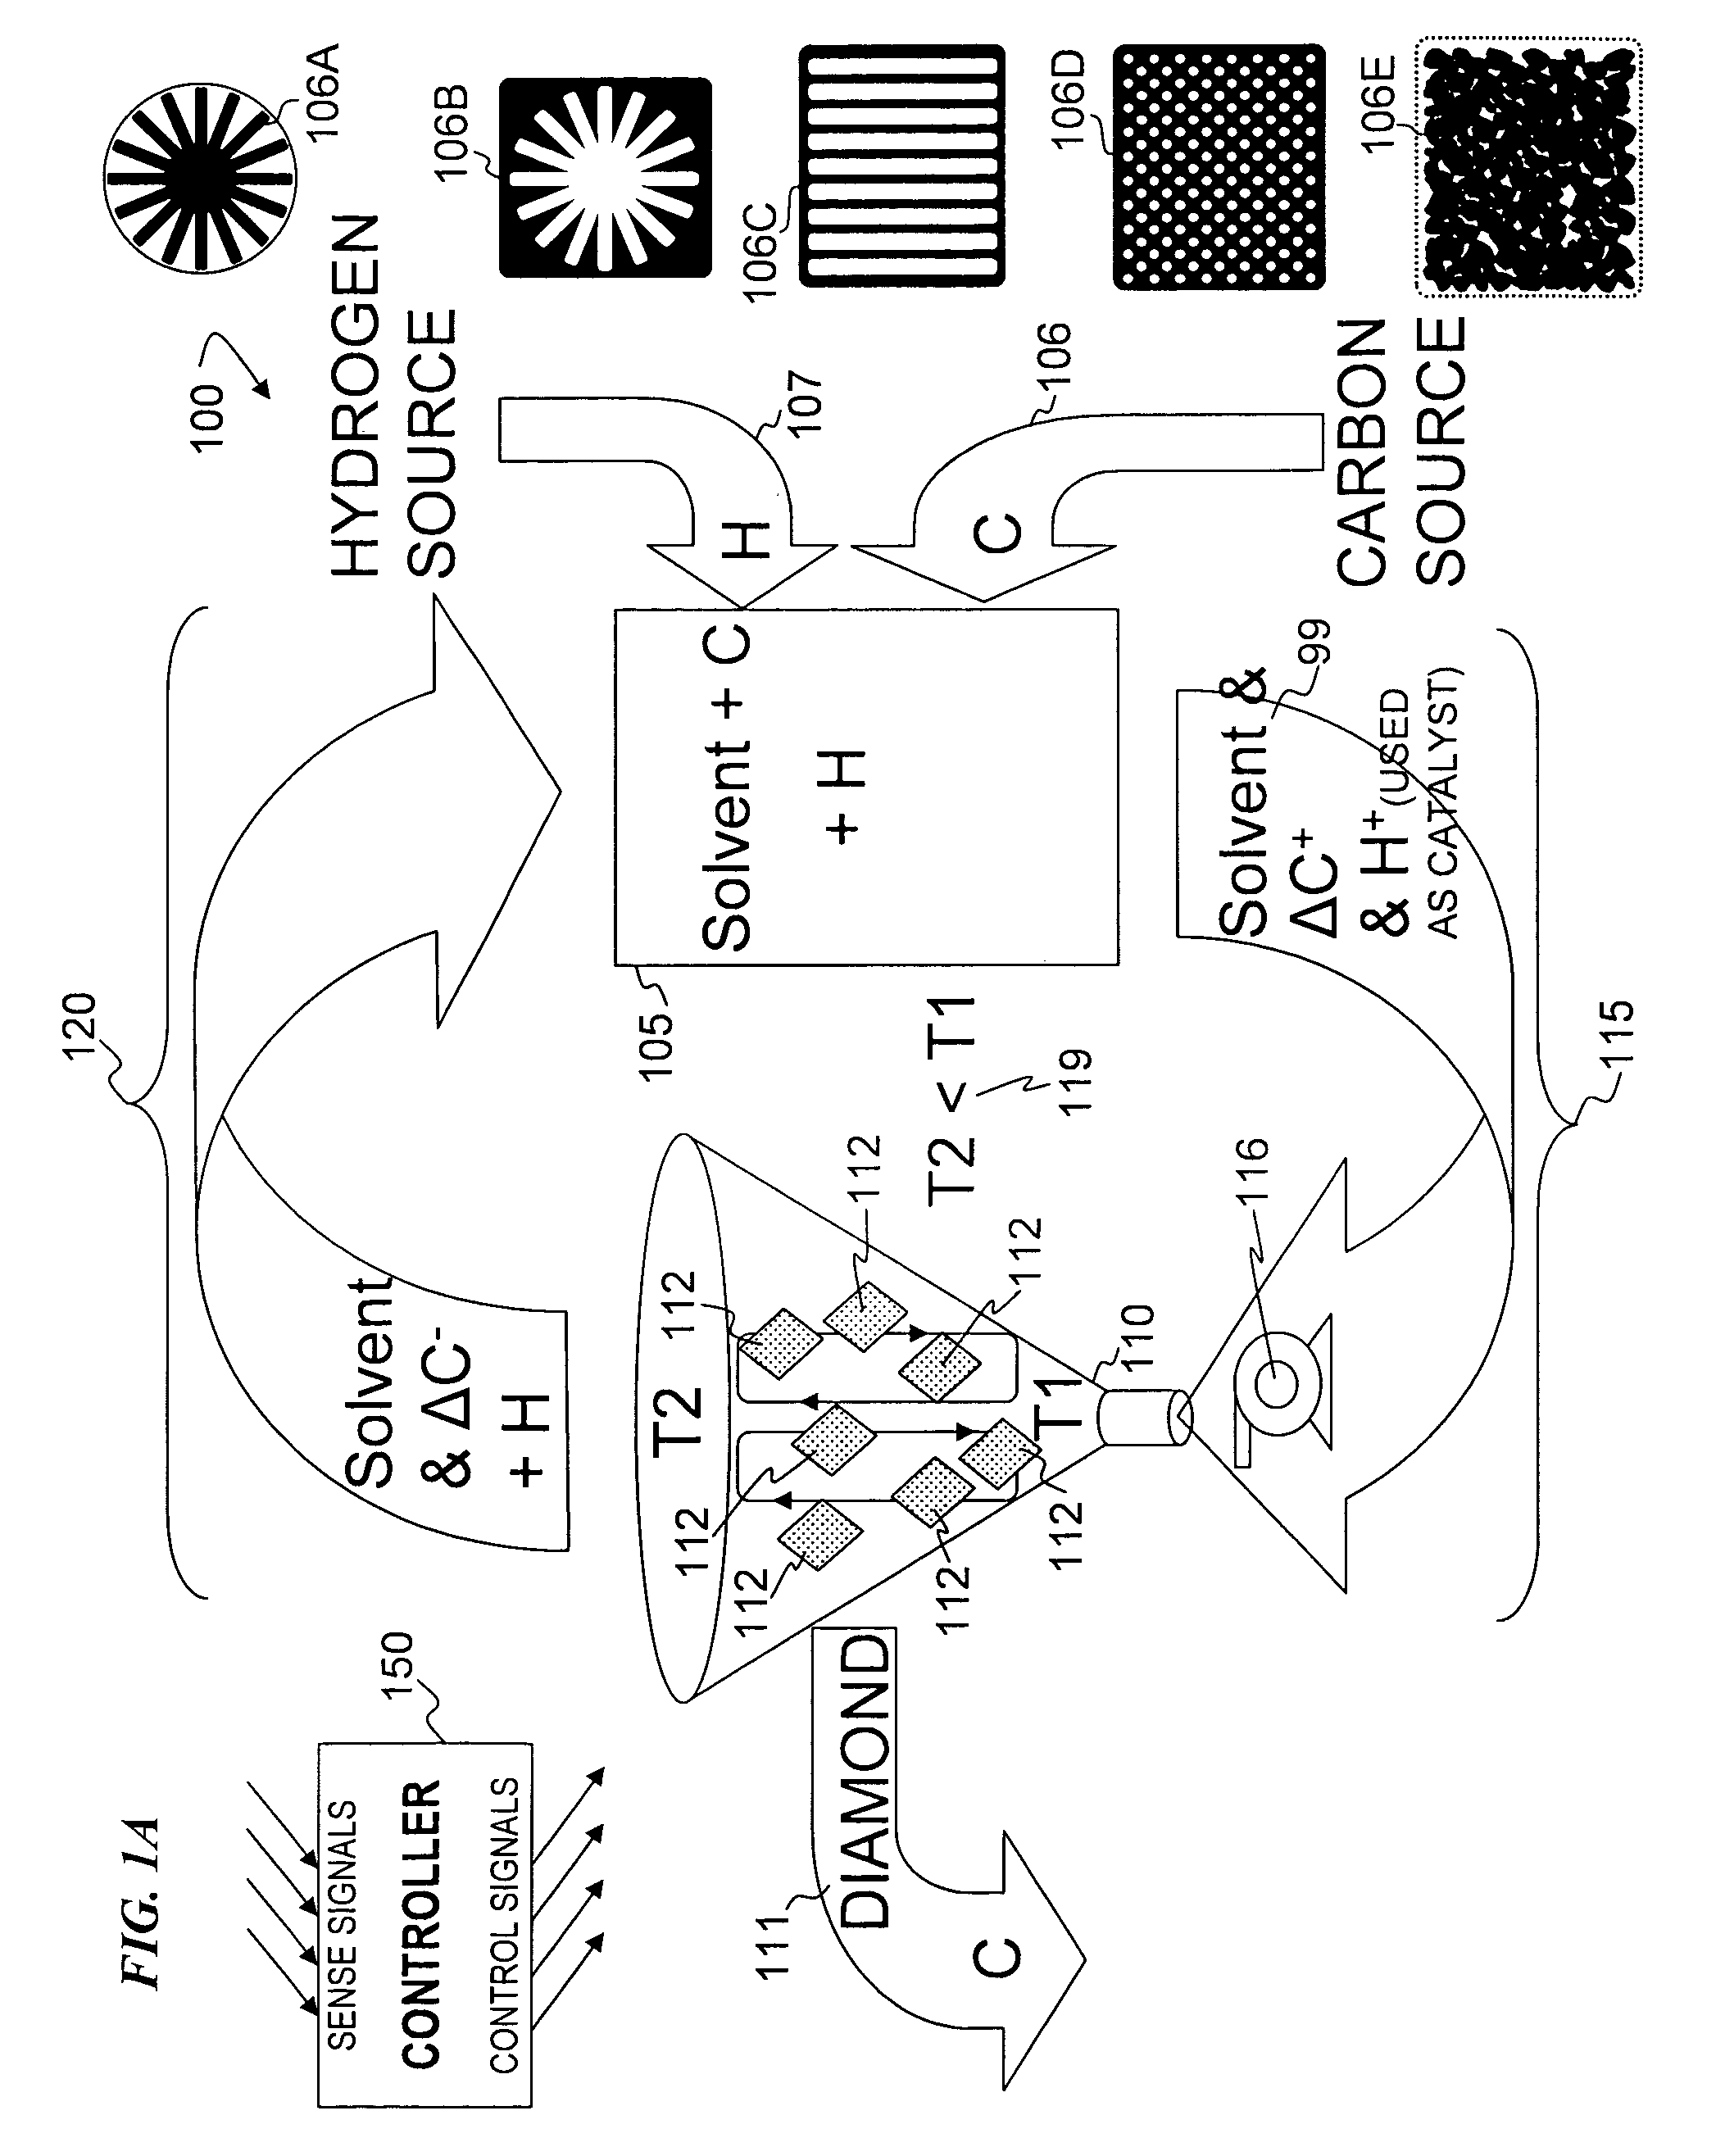 System and method for diamond deposition using a liquid-solvent carbon-transfer mechanism